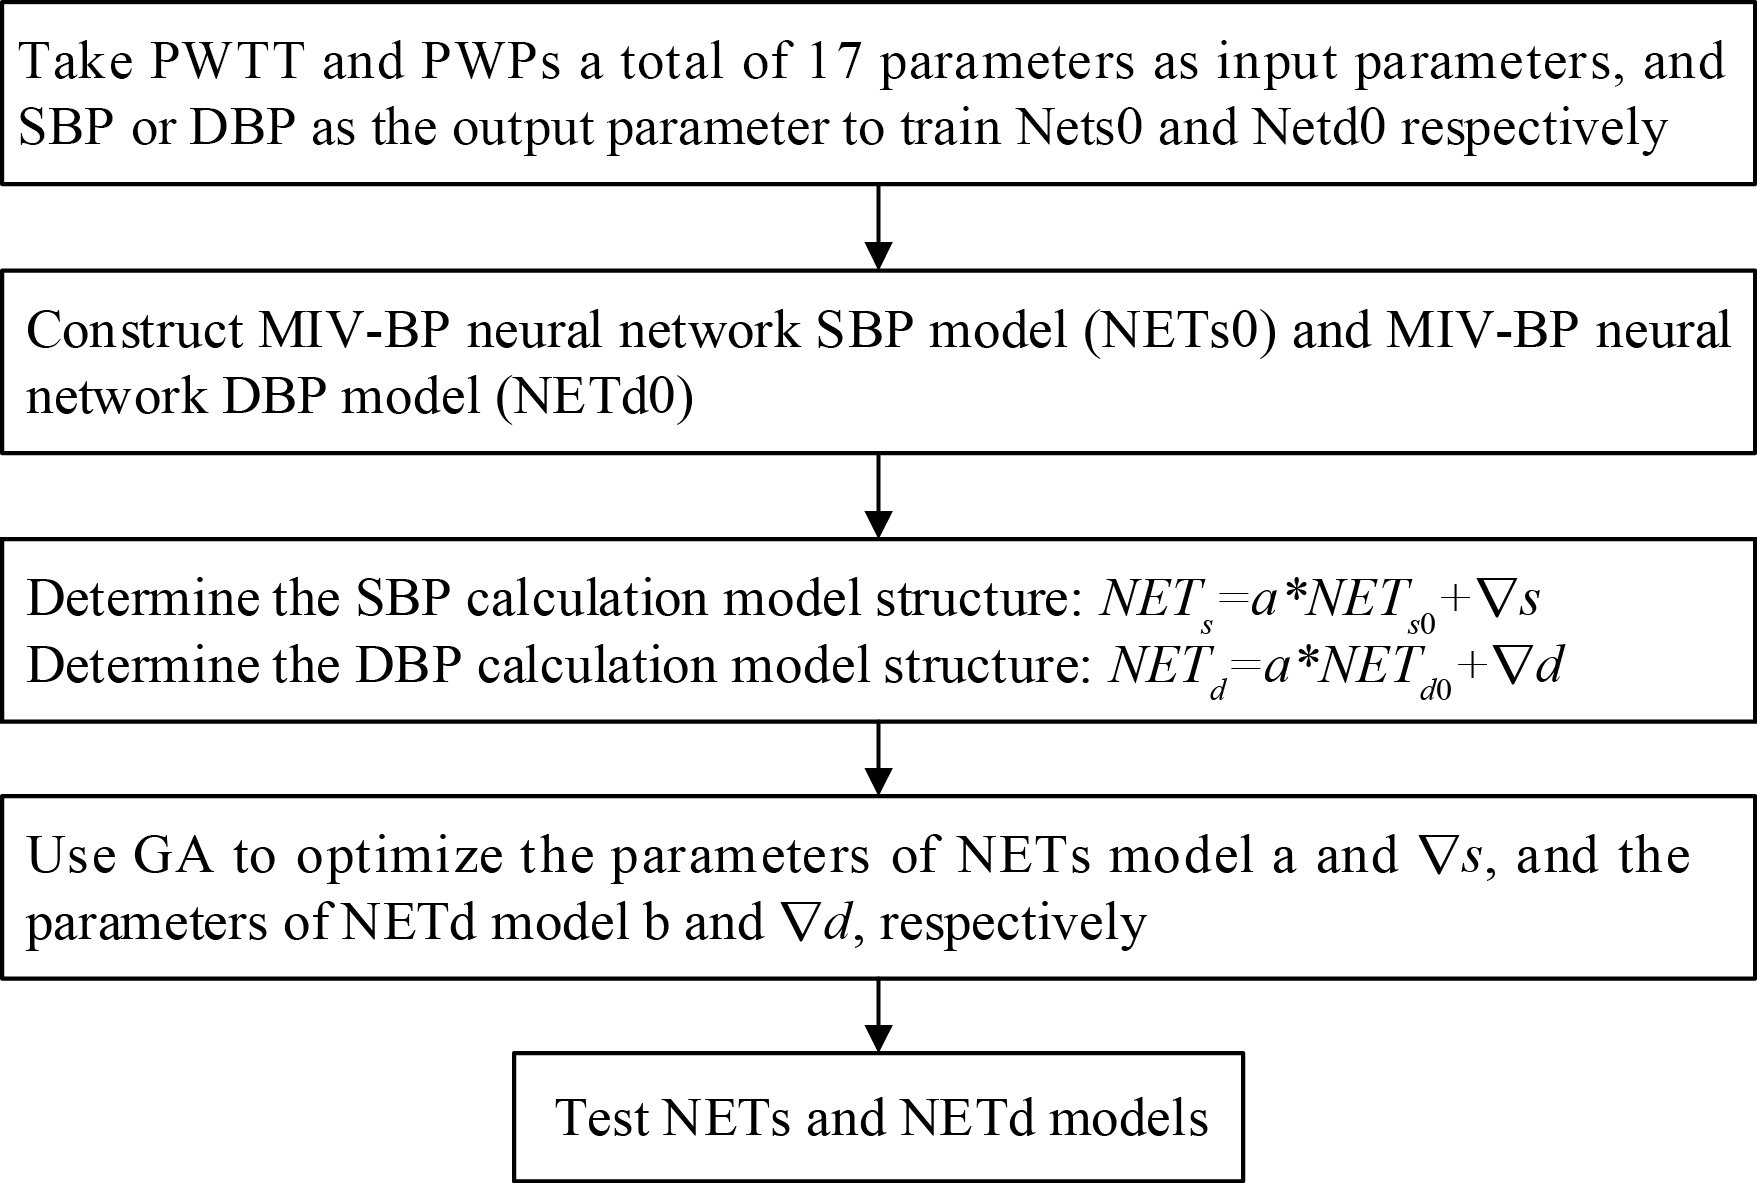 Flow chart of the non-invasive continuous blood pressure measurement models based on the GA-MIV-BP neural network.